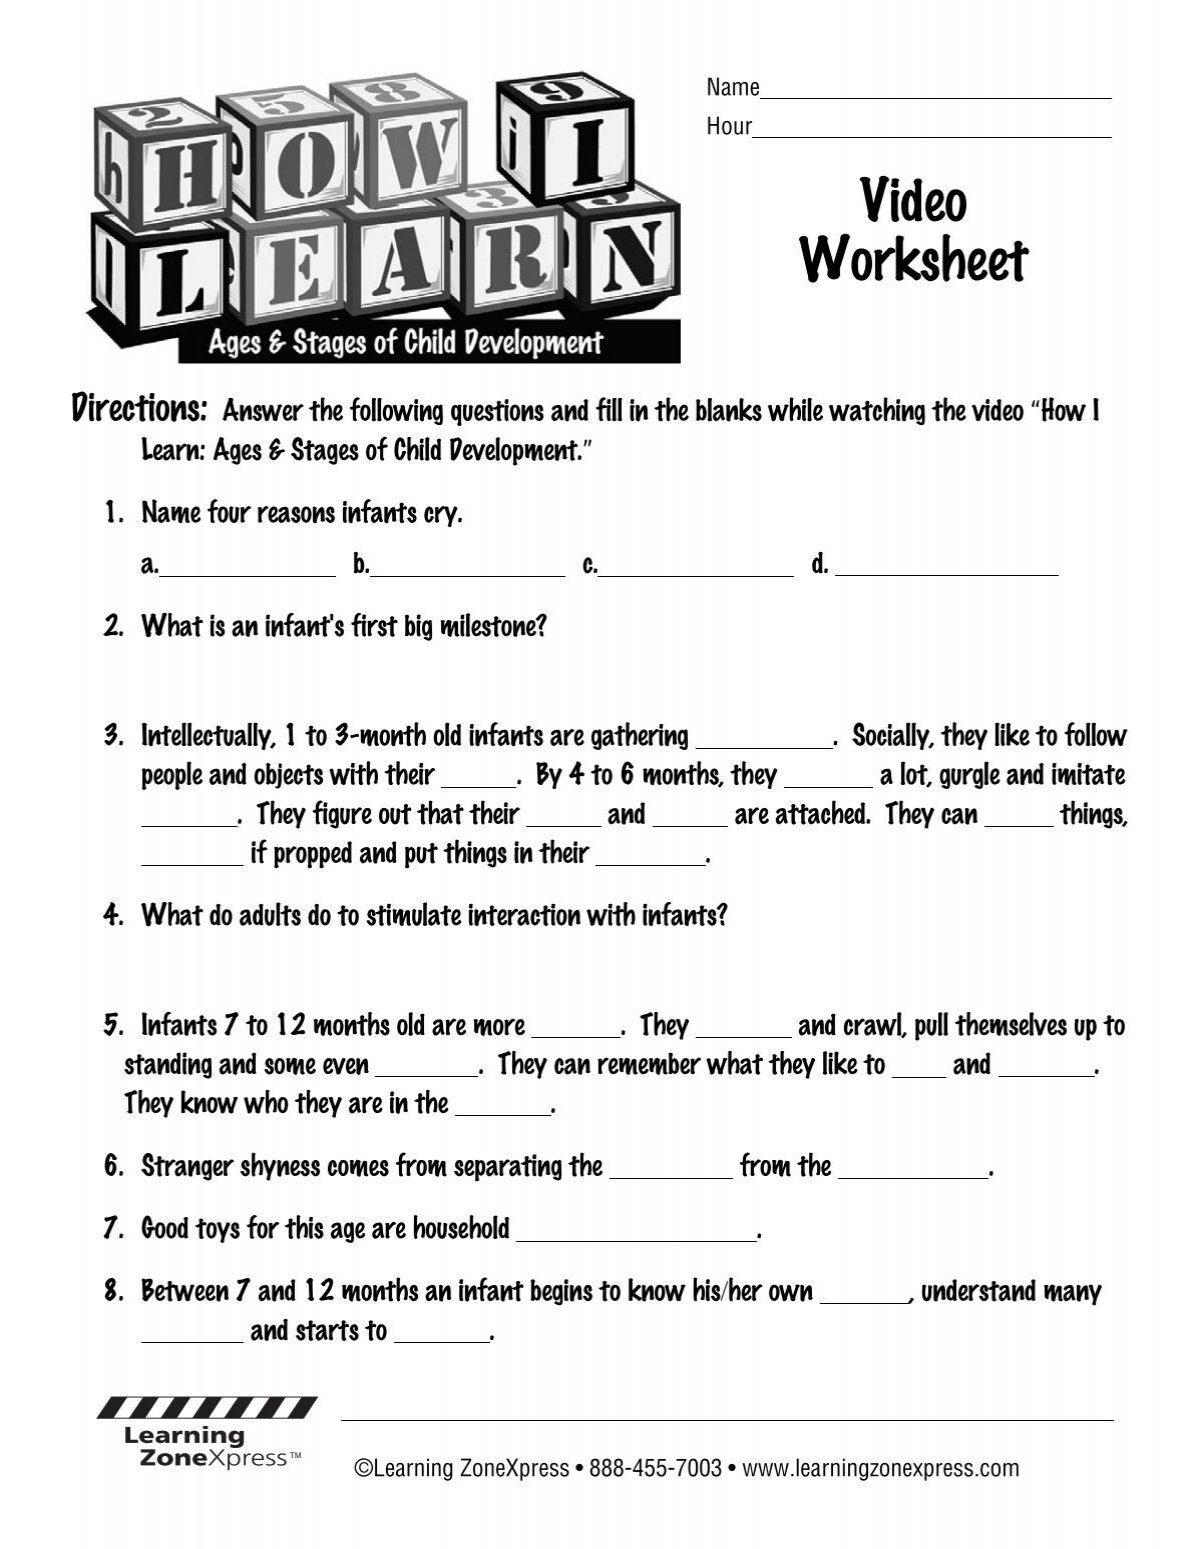 video-worksheet-learning-zone-express